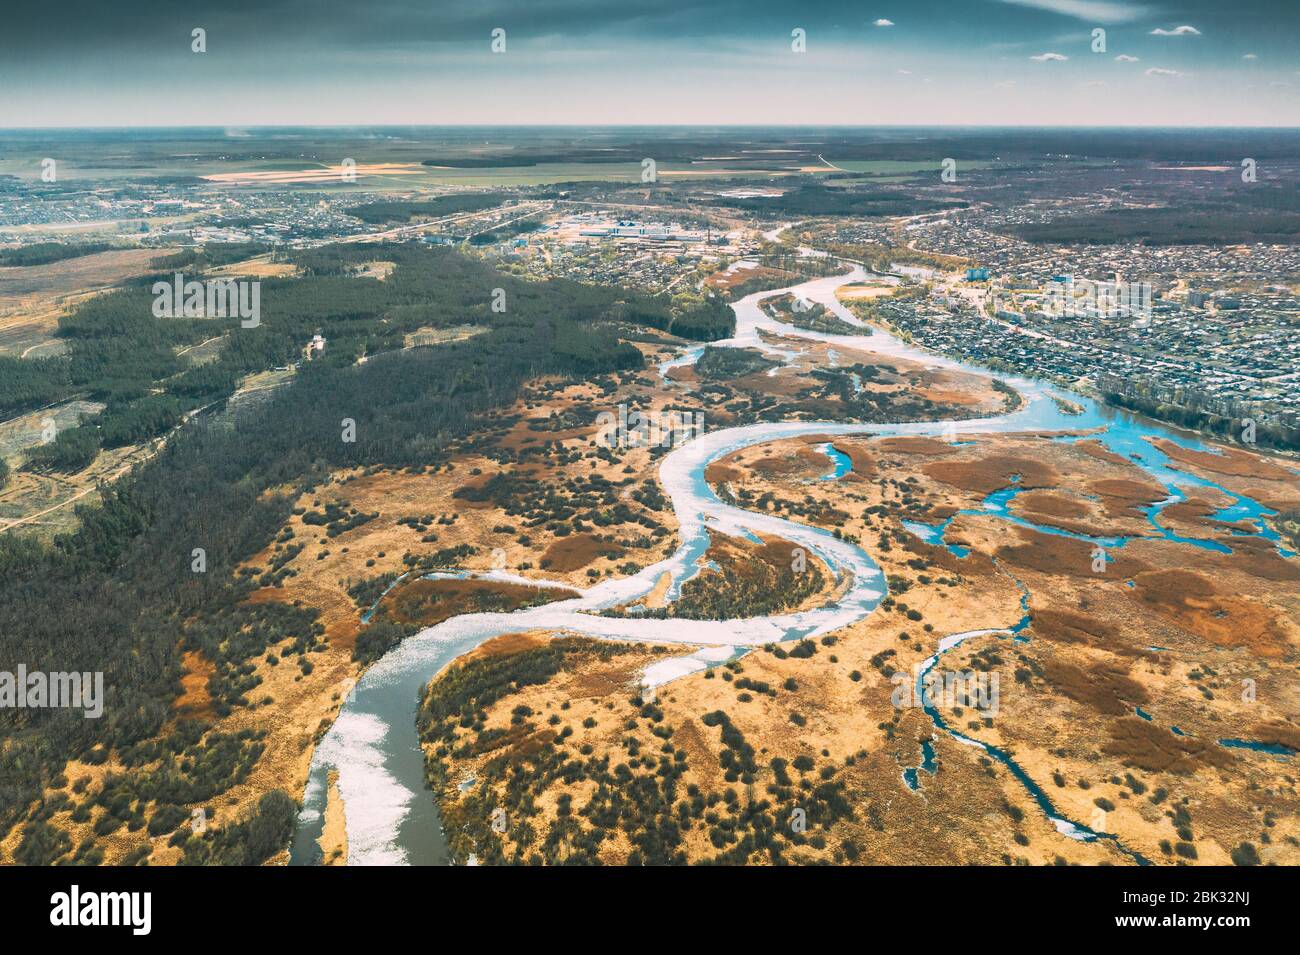 Belarus, Europe. Aerial View Curved River And Small Town In Early Spring Landscape. River bends Curves and dry grass landscape. Top View Of Beautiful Stock Photo